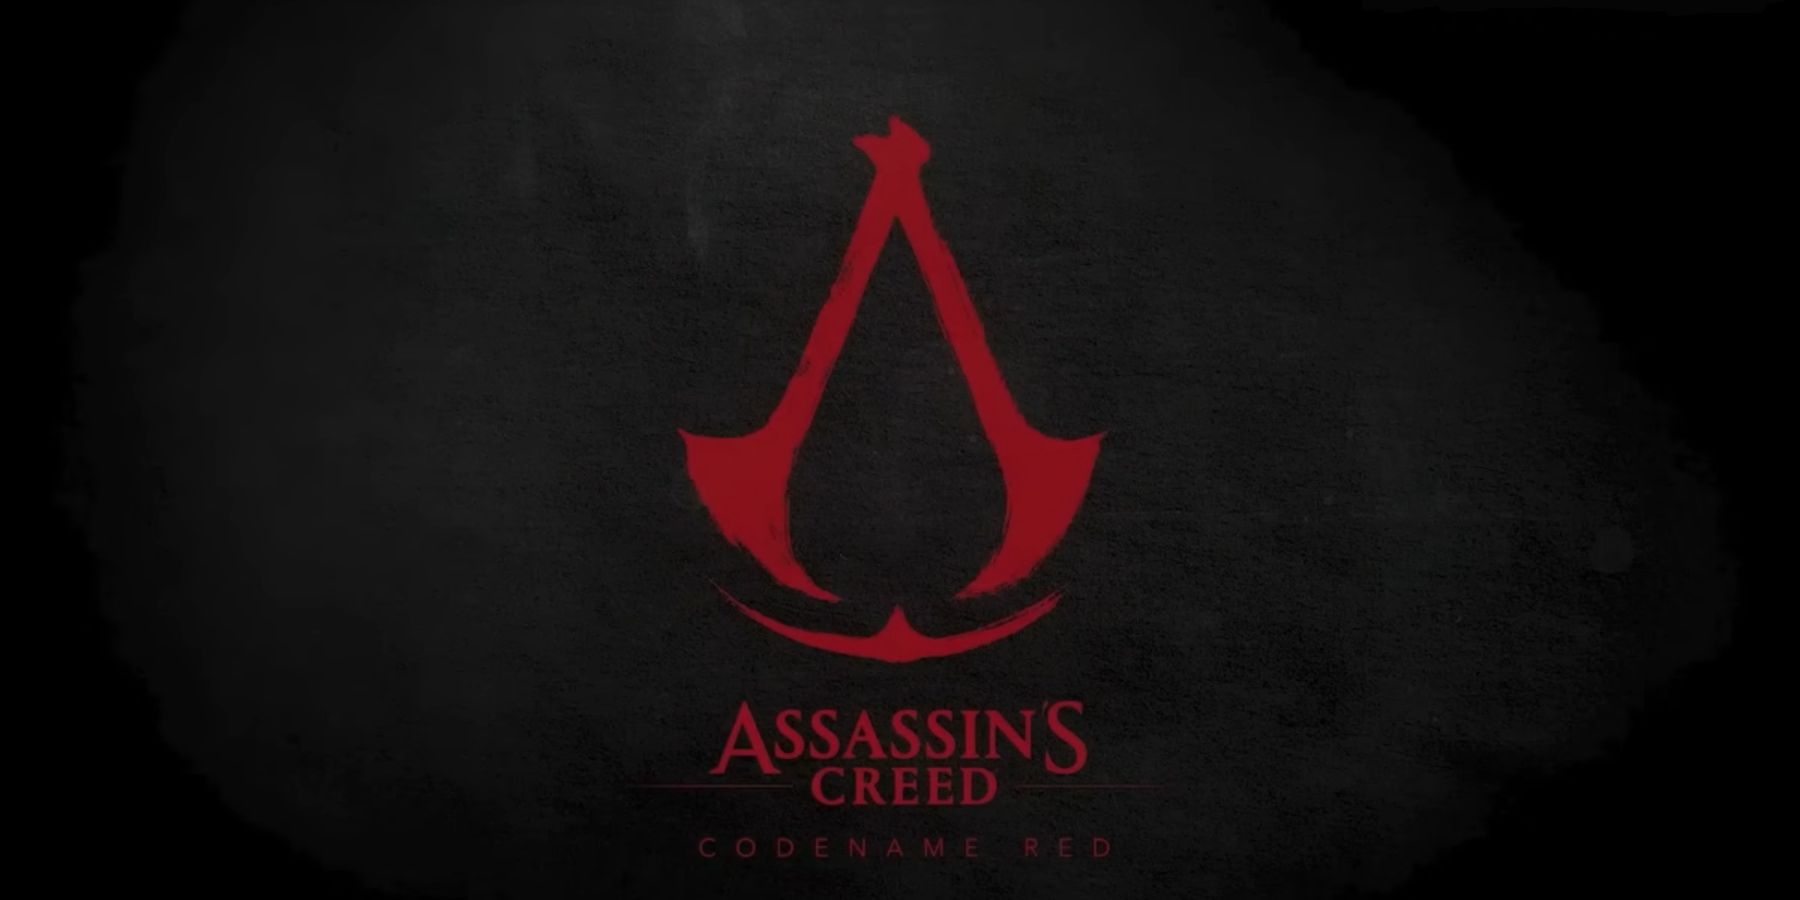 Assassin's Creed Red logo